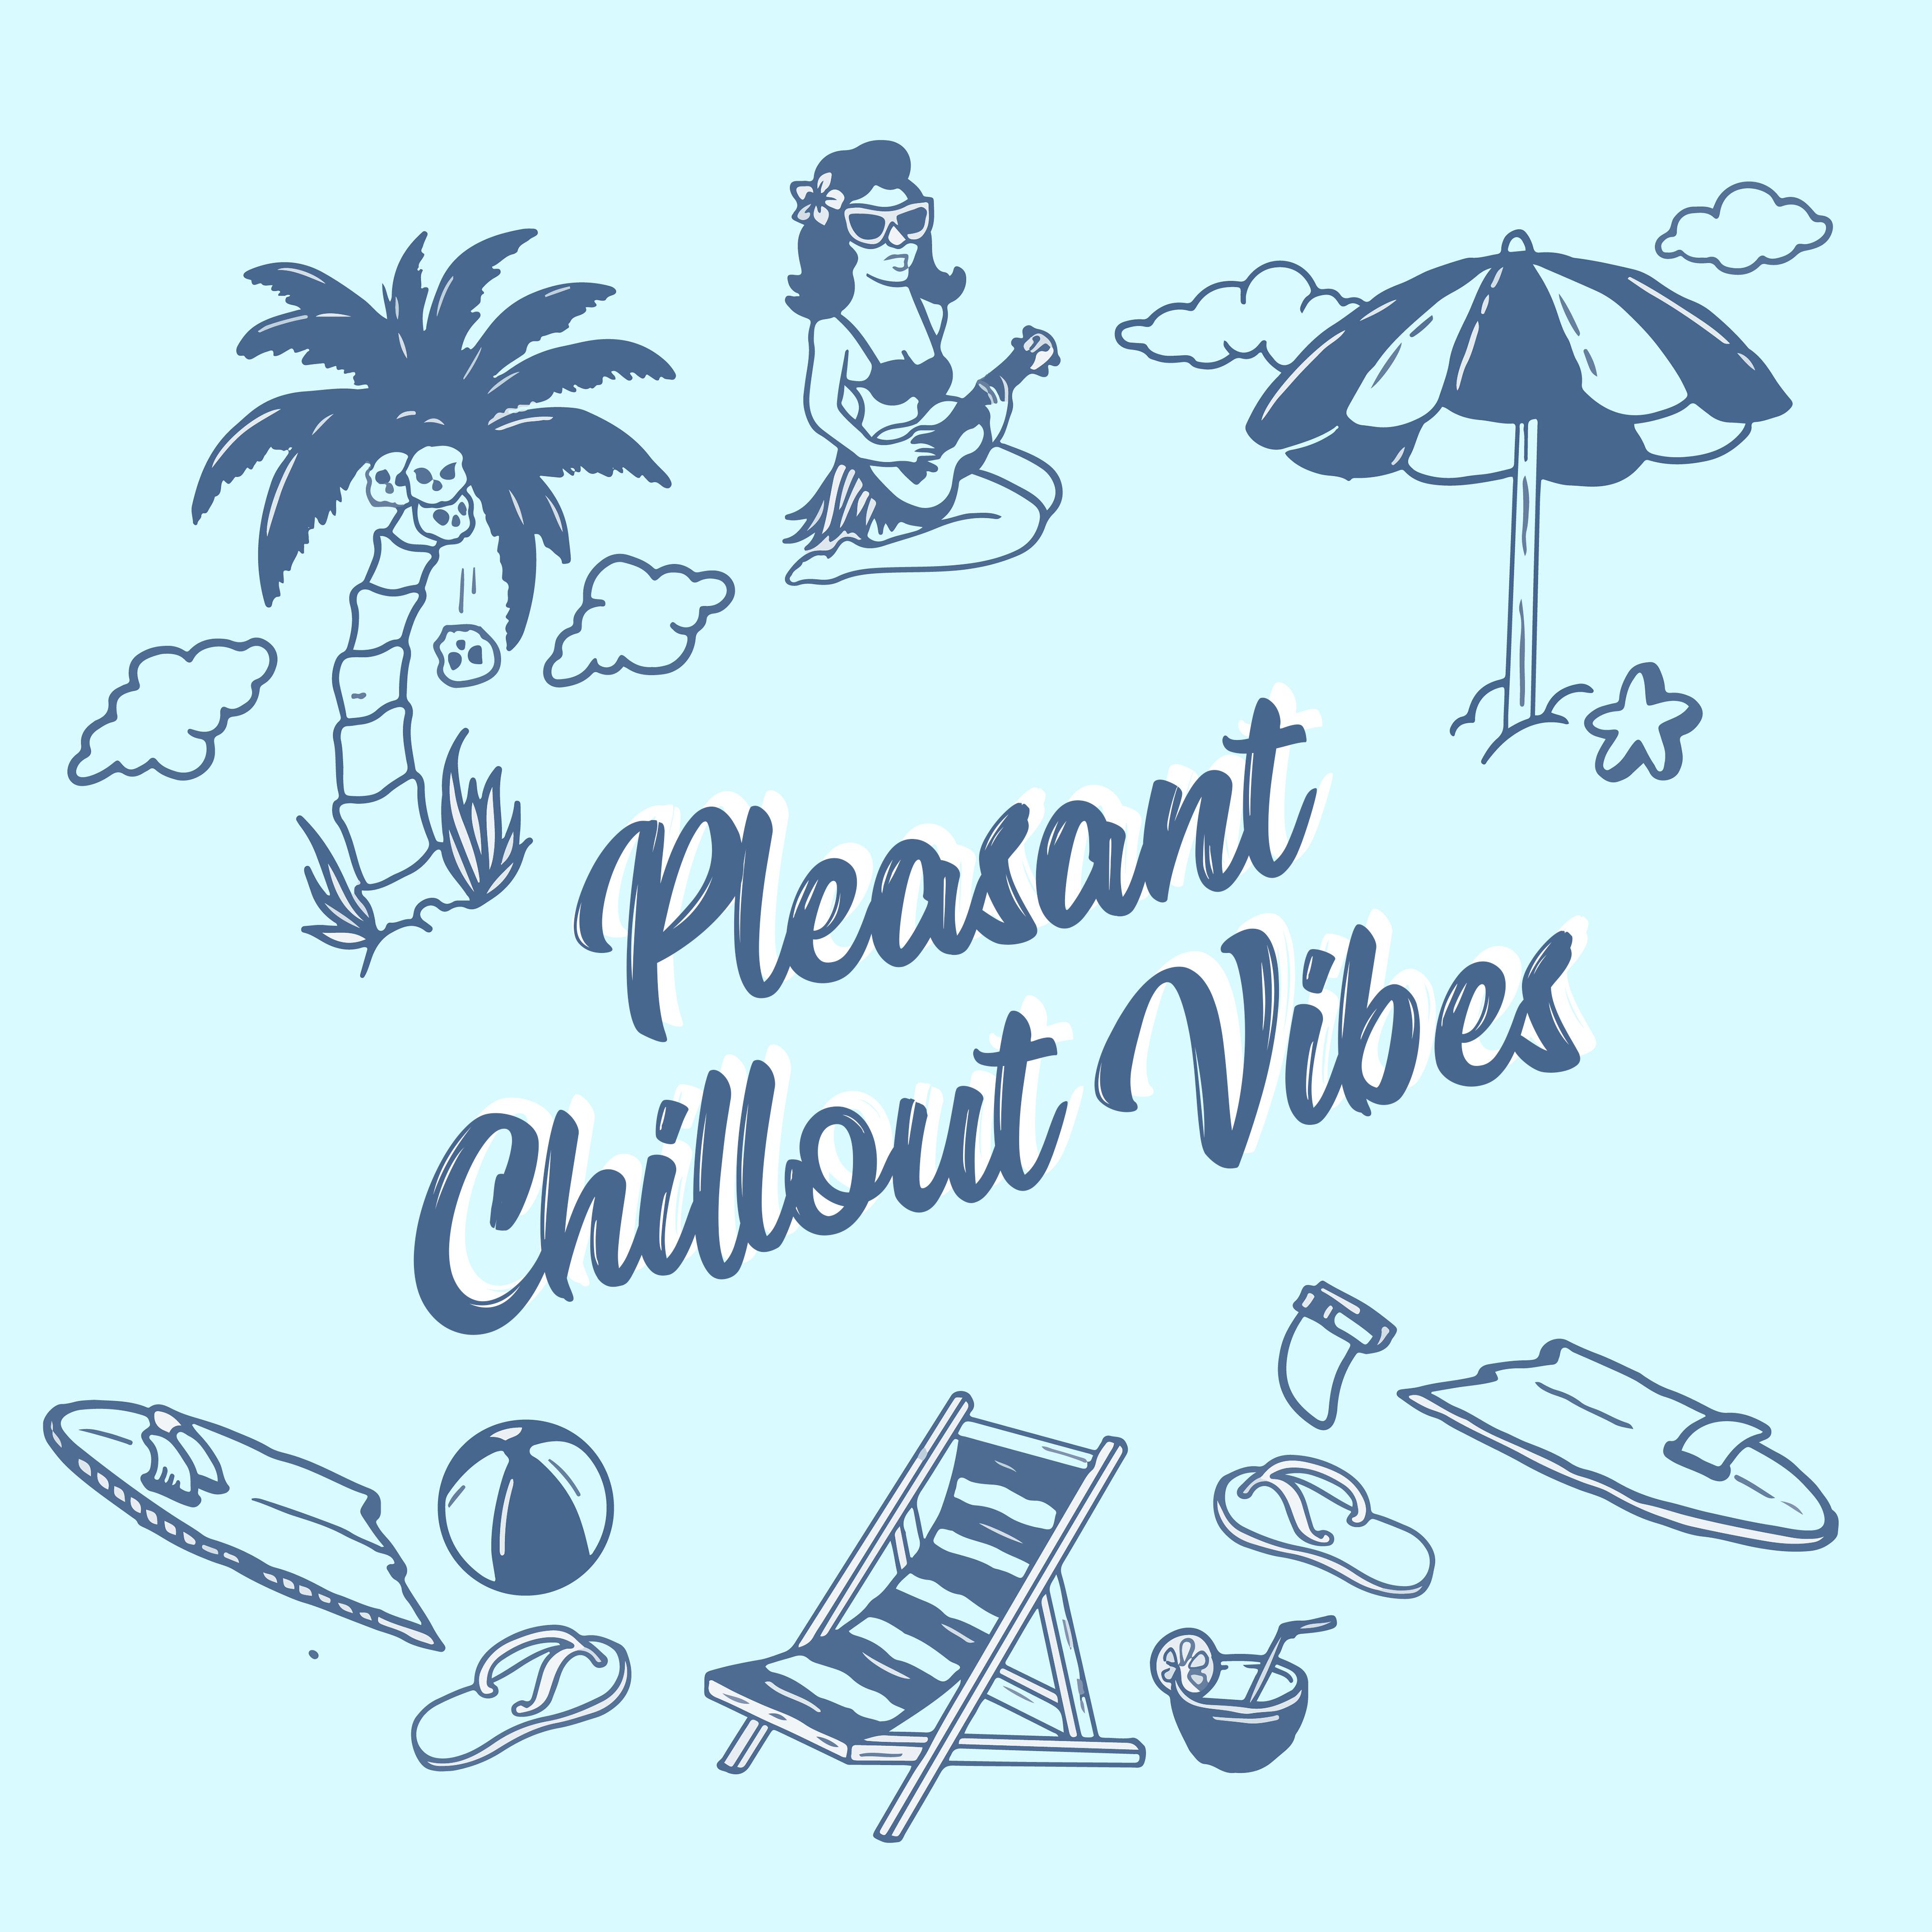 Pleasant Chillout Vibes for Summer Evenings, Moments of Relaxation, Blissful Respite, Tranquility and Moments of Aloneness